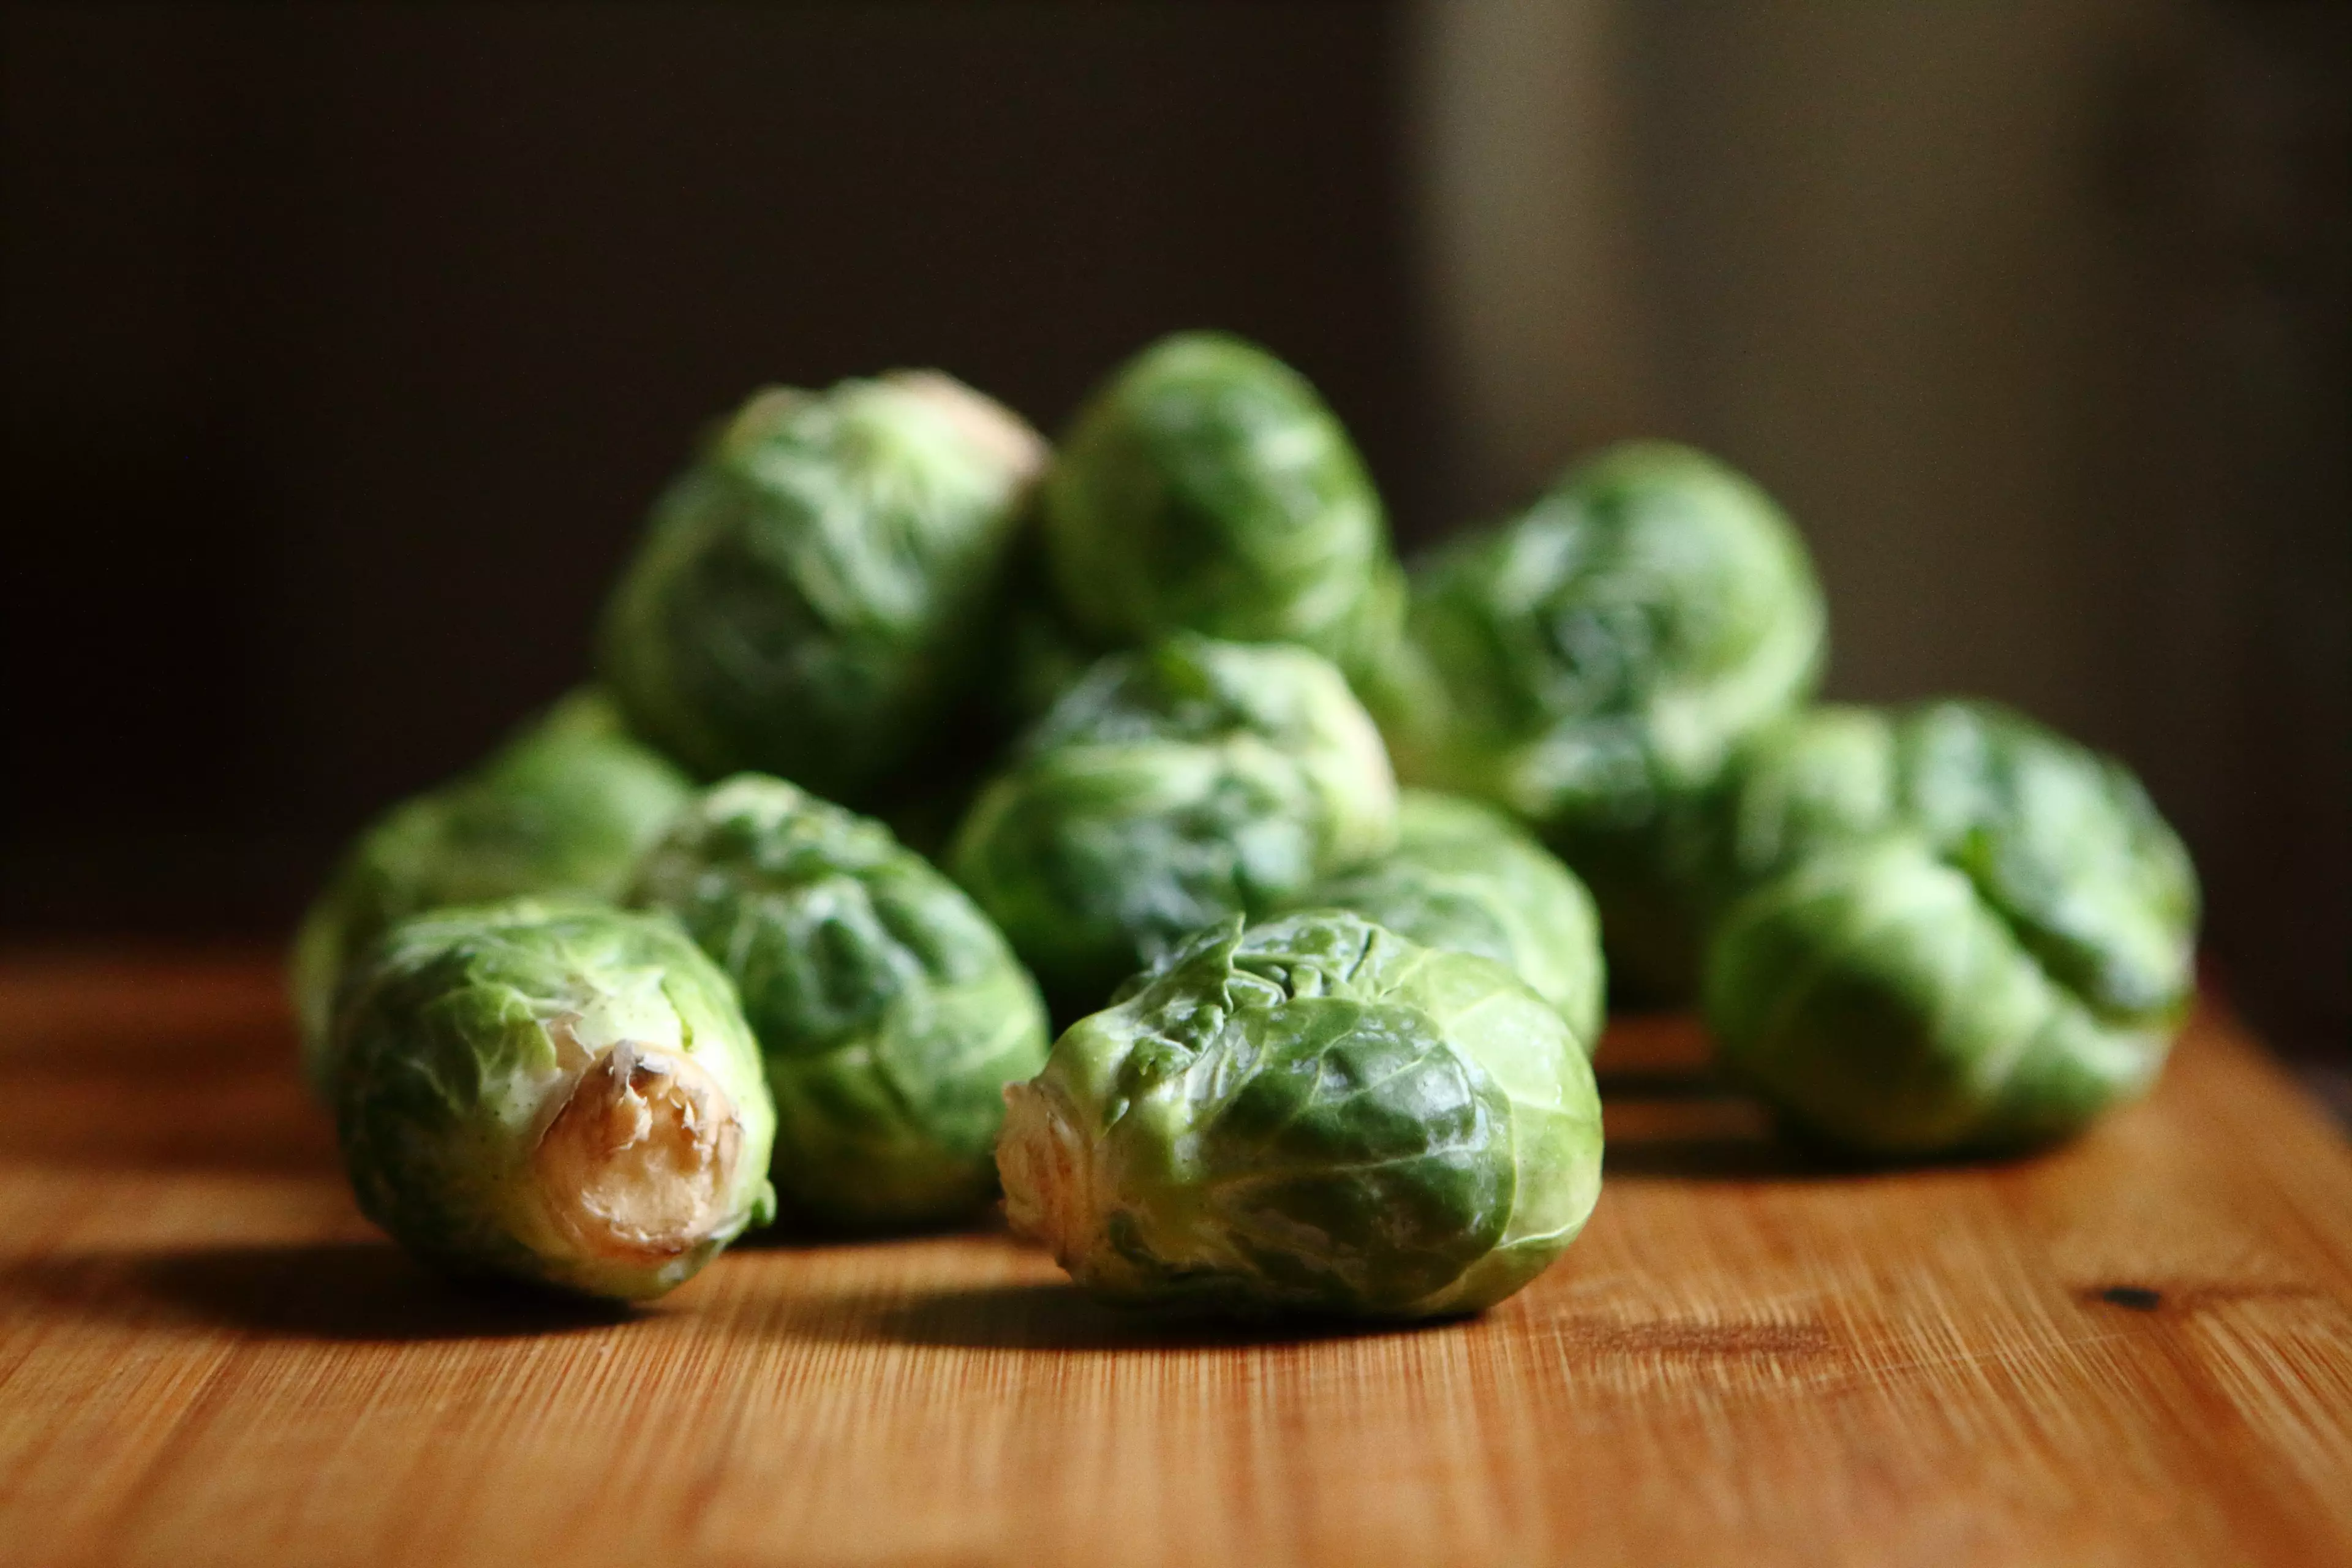 Brussels sprouts really split the nation (